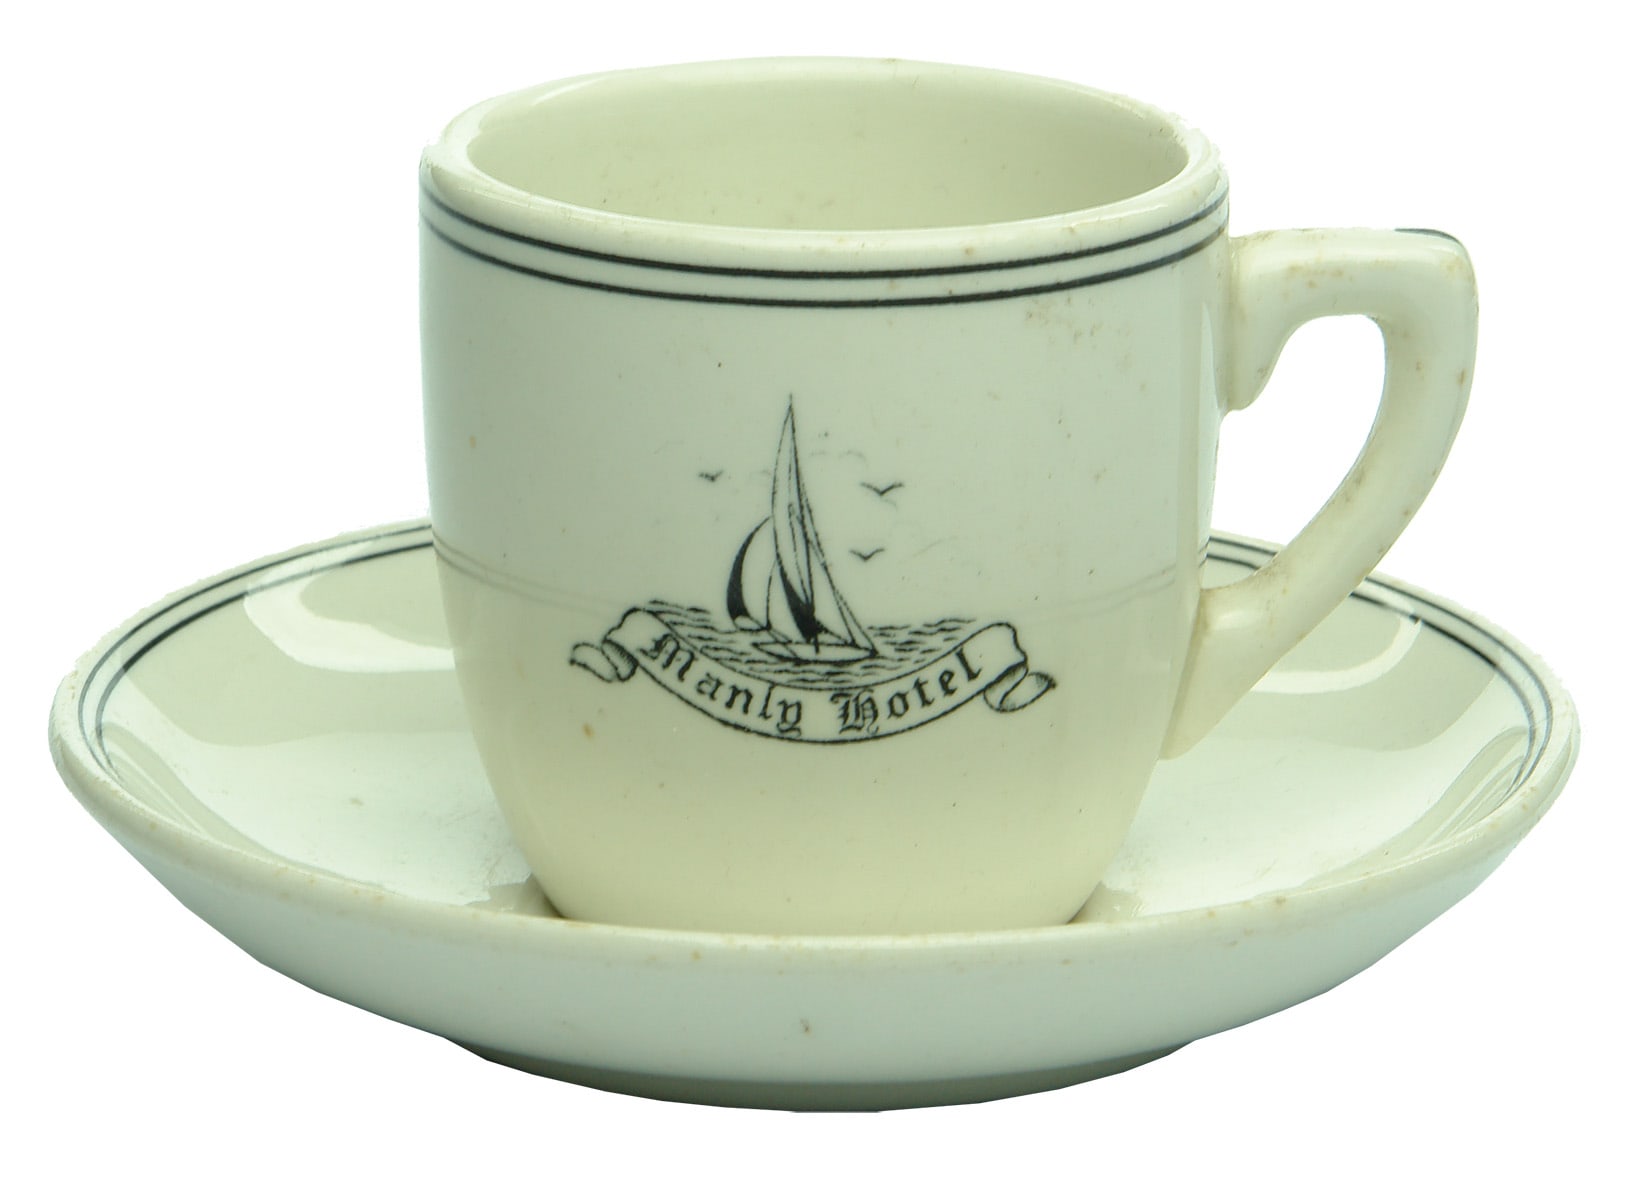 Manly Hotel Yacht Hotelware Cup Saucer